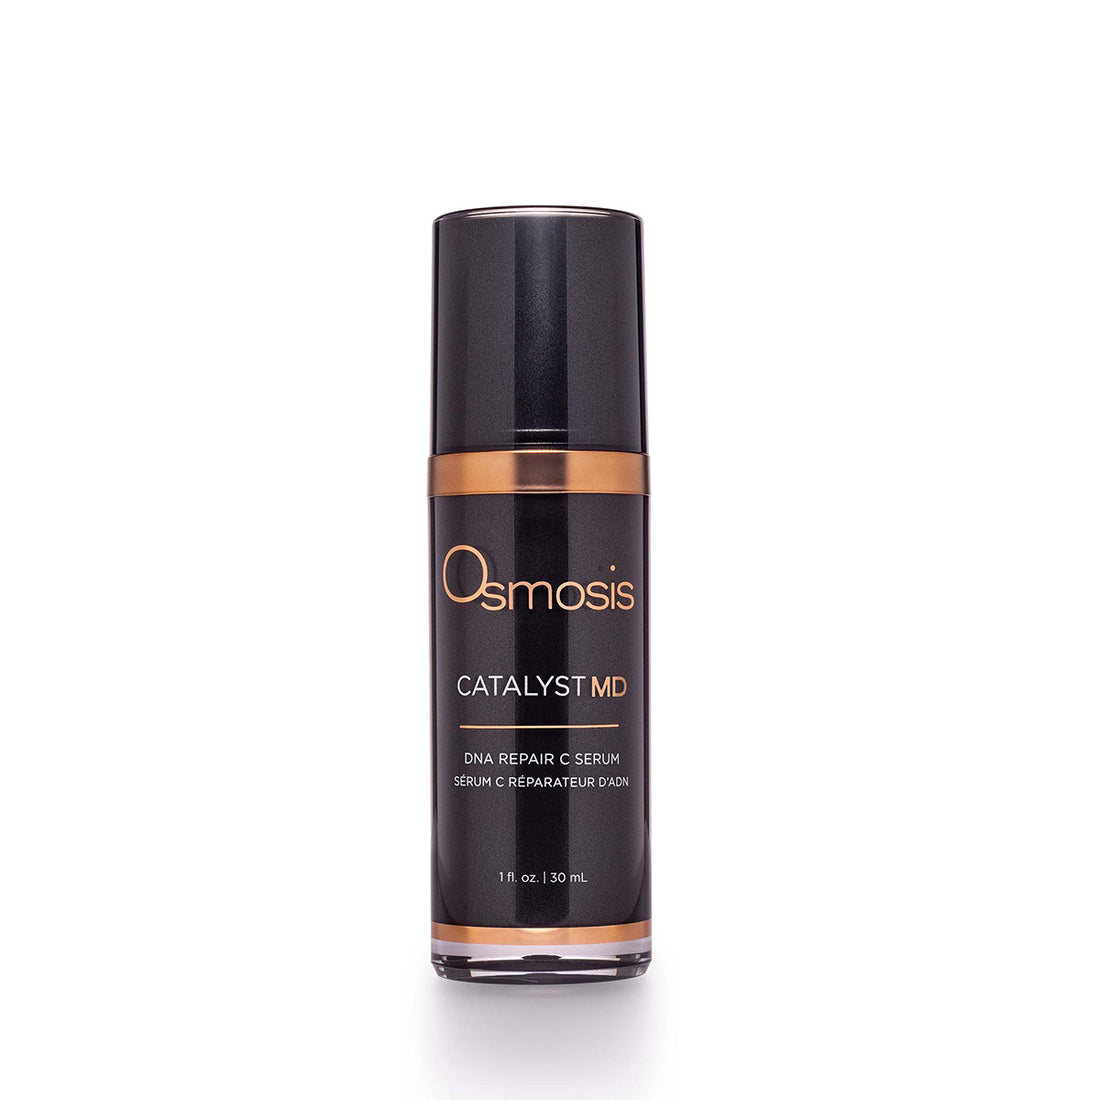 Osmosis Skincare Catalyst MD Serum heals wounds, repairs scar tissue and reverses aging.